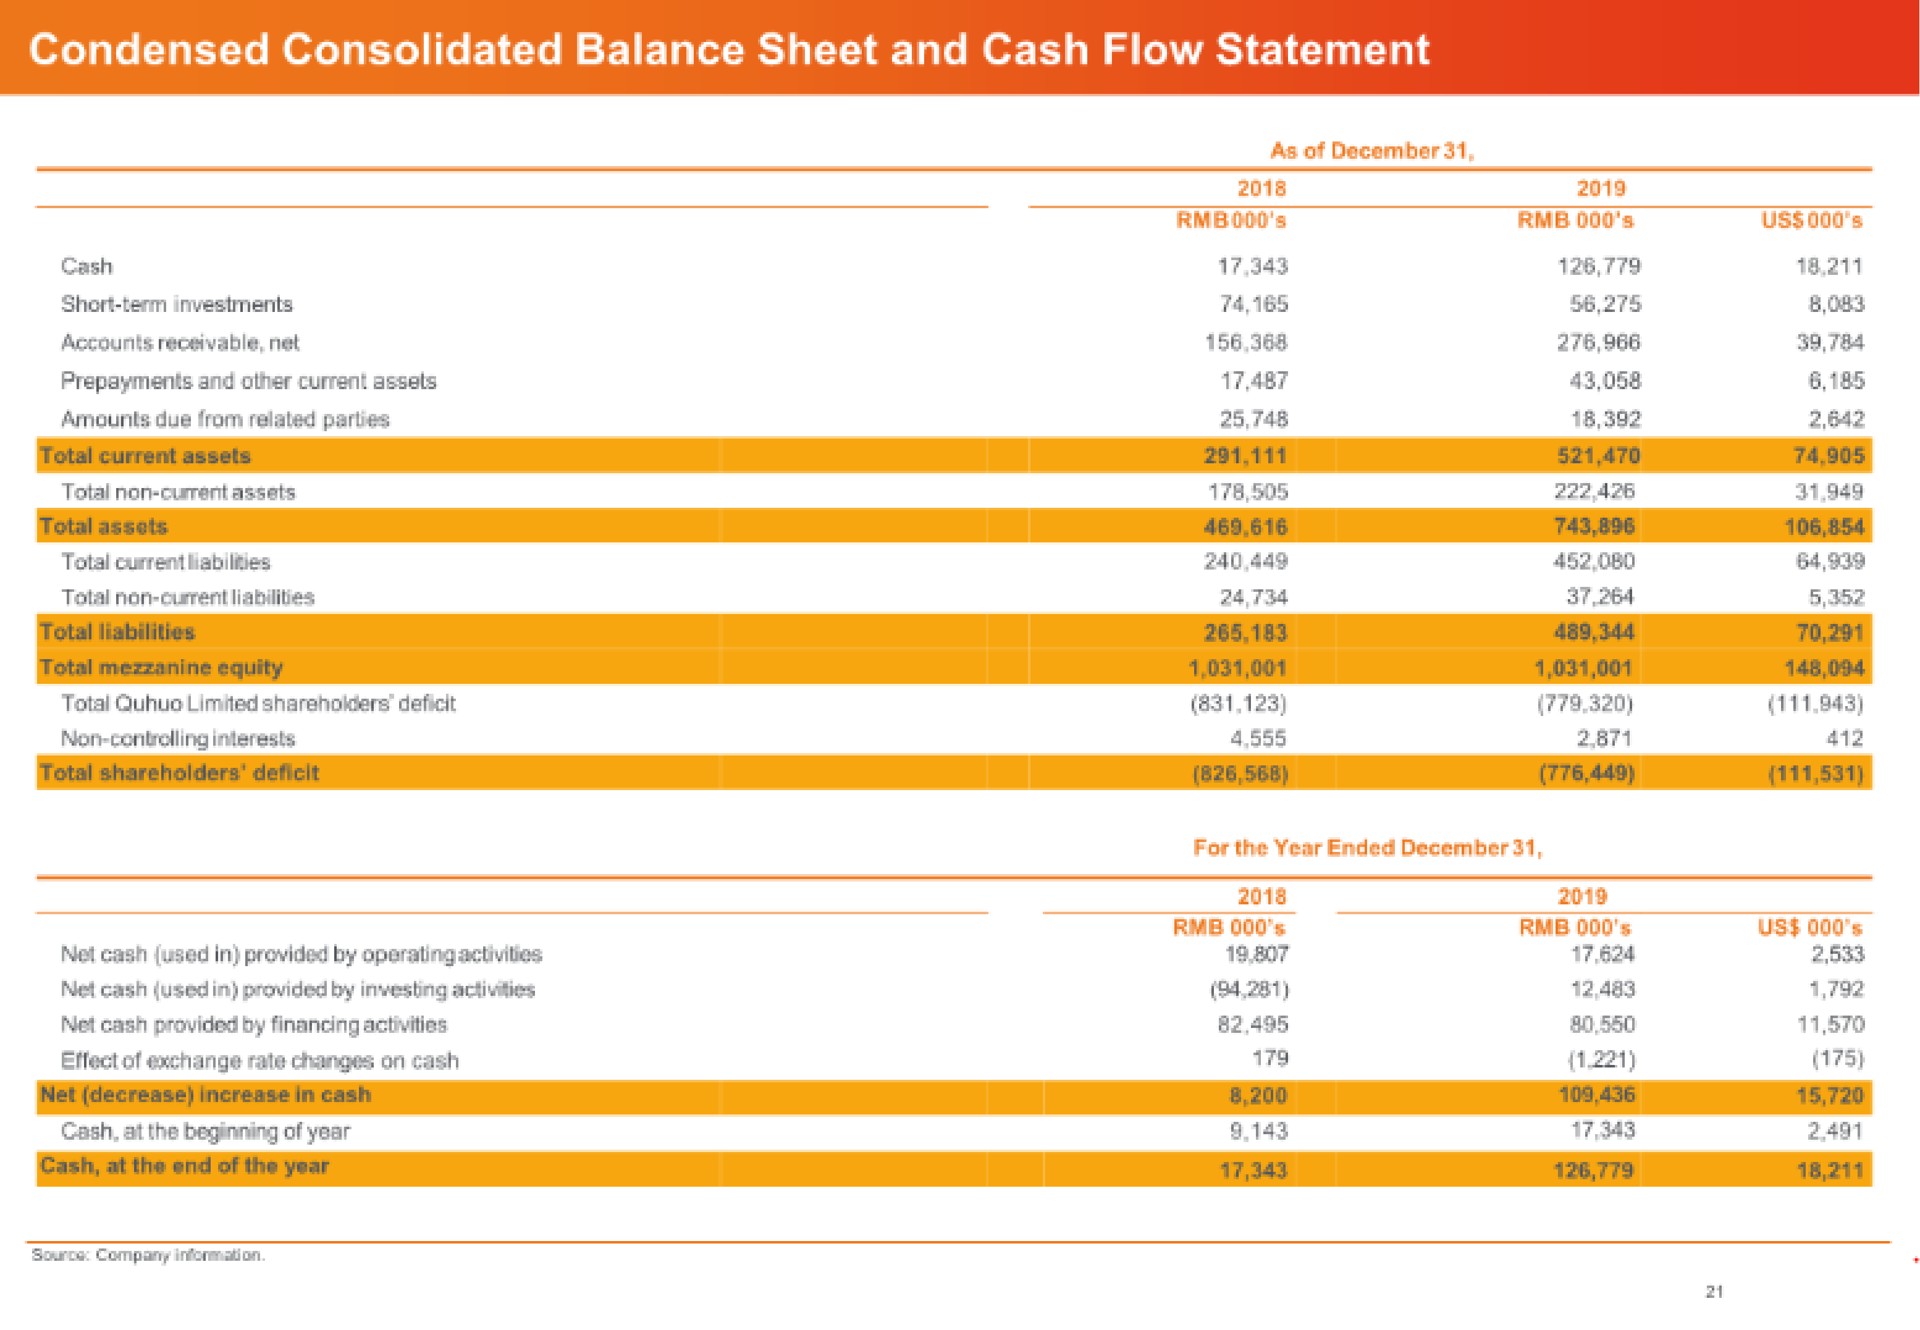 condensed consolidated balance sheet and cash flow statement | Quhuo